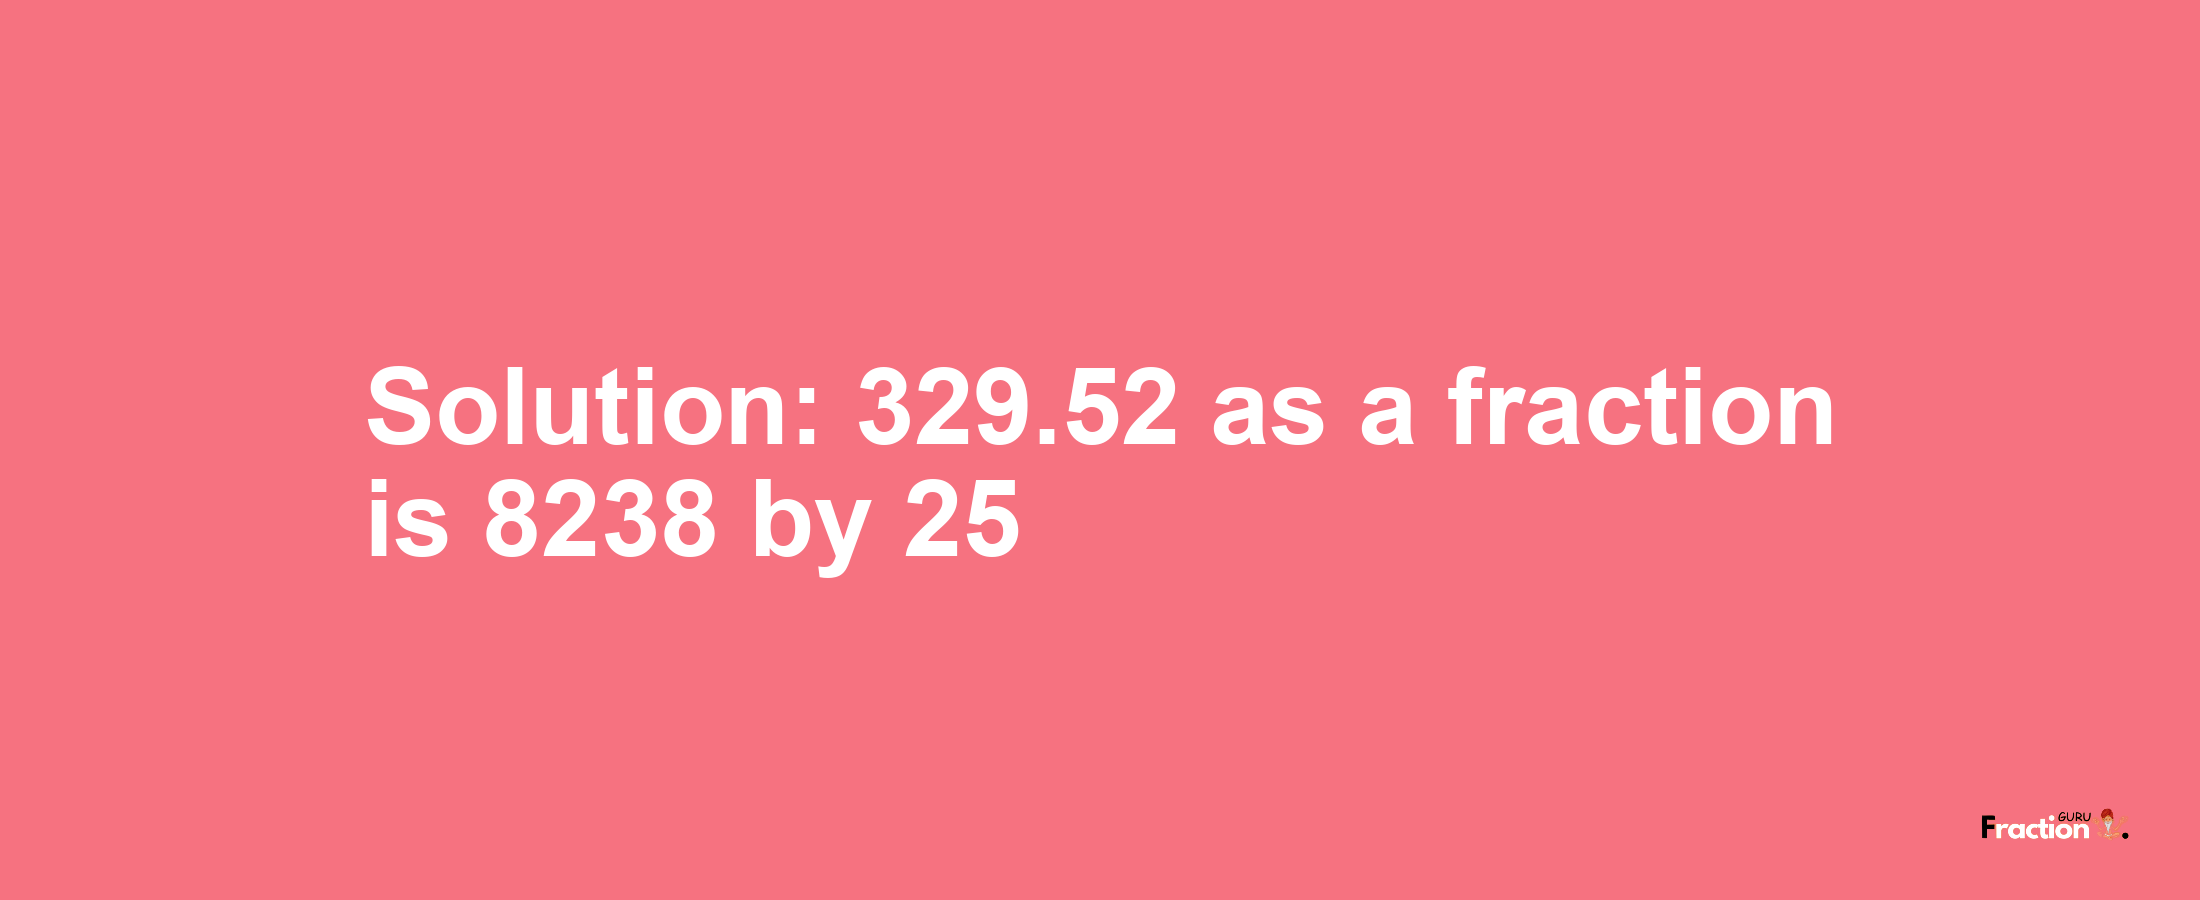 Solution:329.52 as a fraction is 8238/25